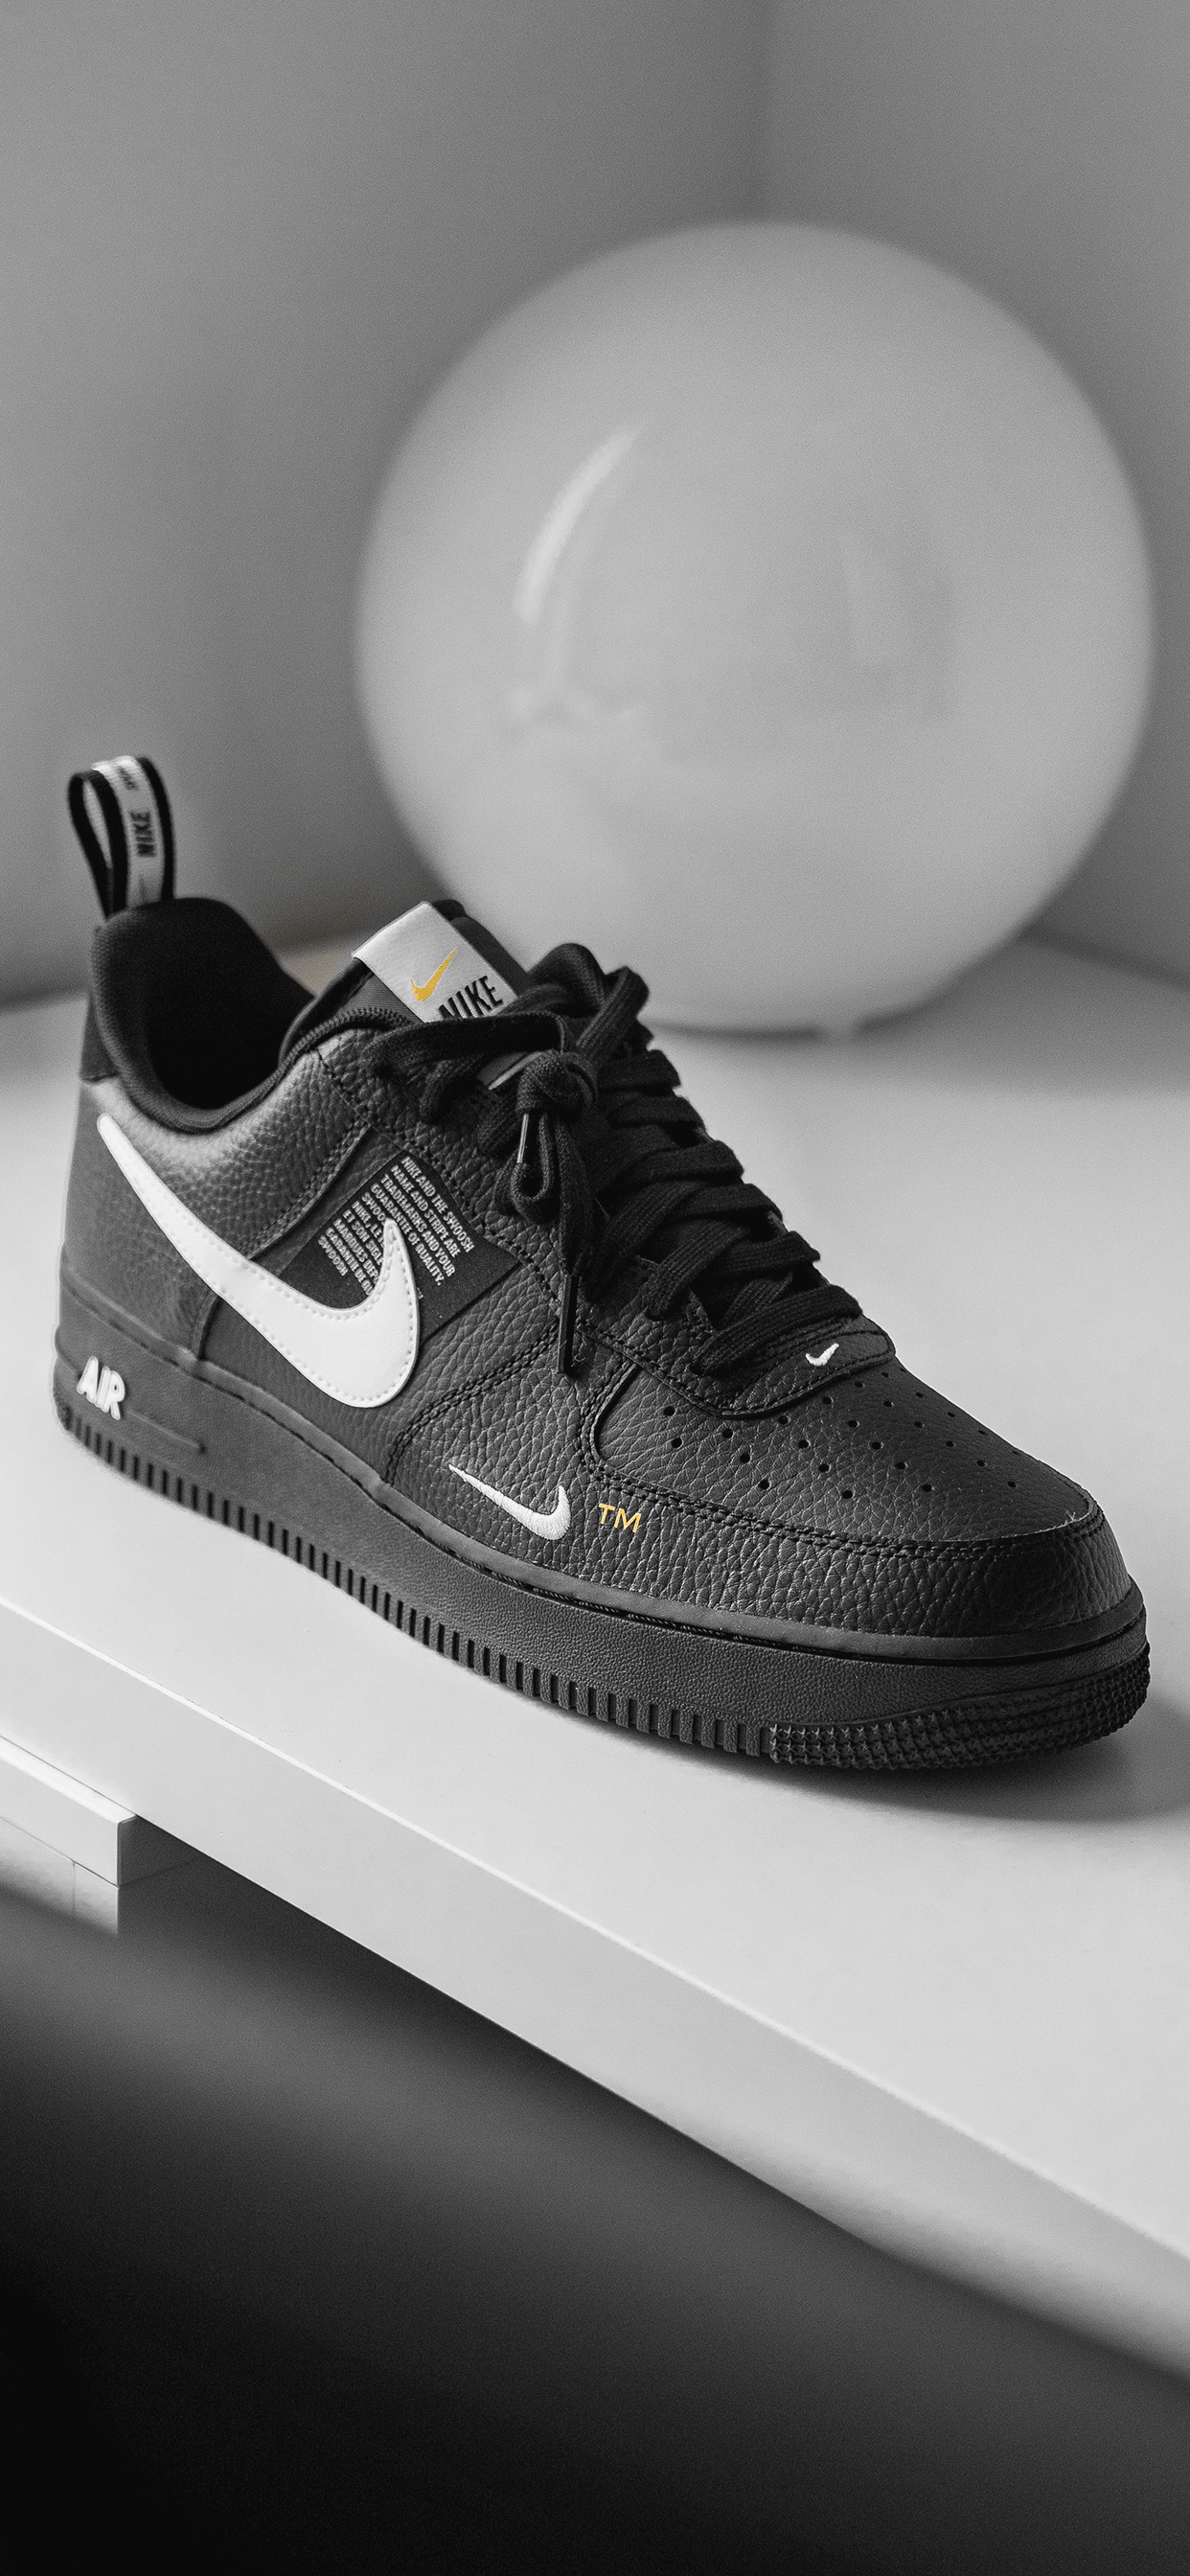 Nike Air Force Phone Wallpapers on